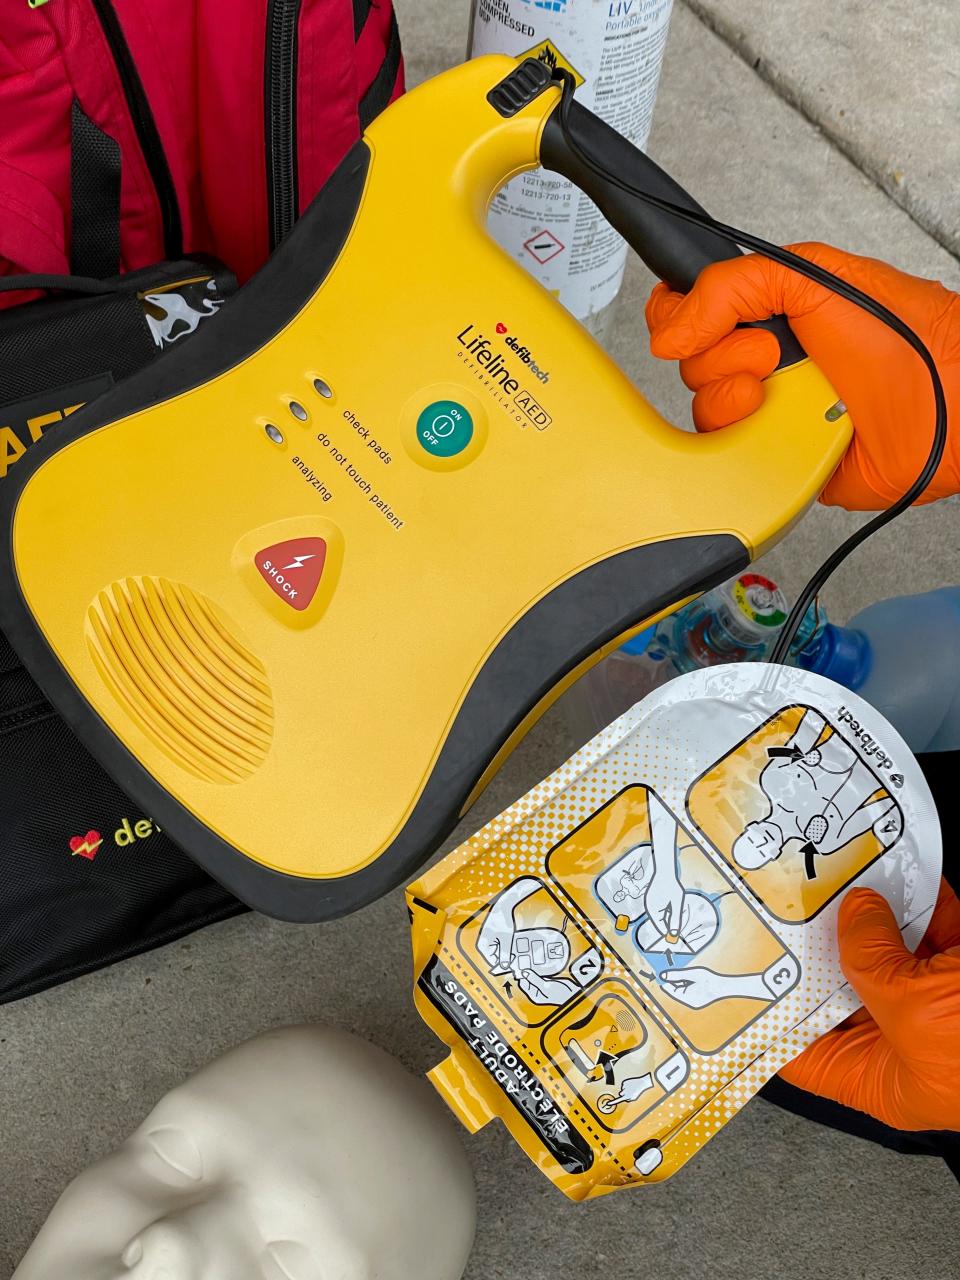 An automated defibrillator is one of the Basic Life Support (BLS) medical apparatus that DeFuniak Springs firefighters carry with them on calls. The department hopes to have approval from the state of Florida by October to begin offering Advanced Life Support (ALS) services.